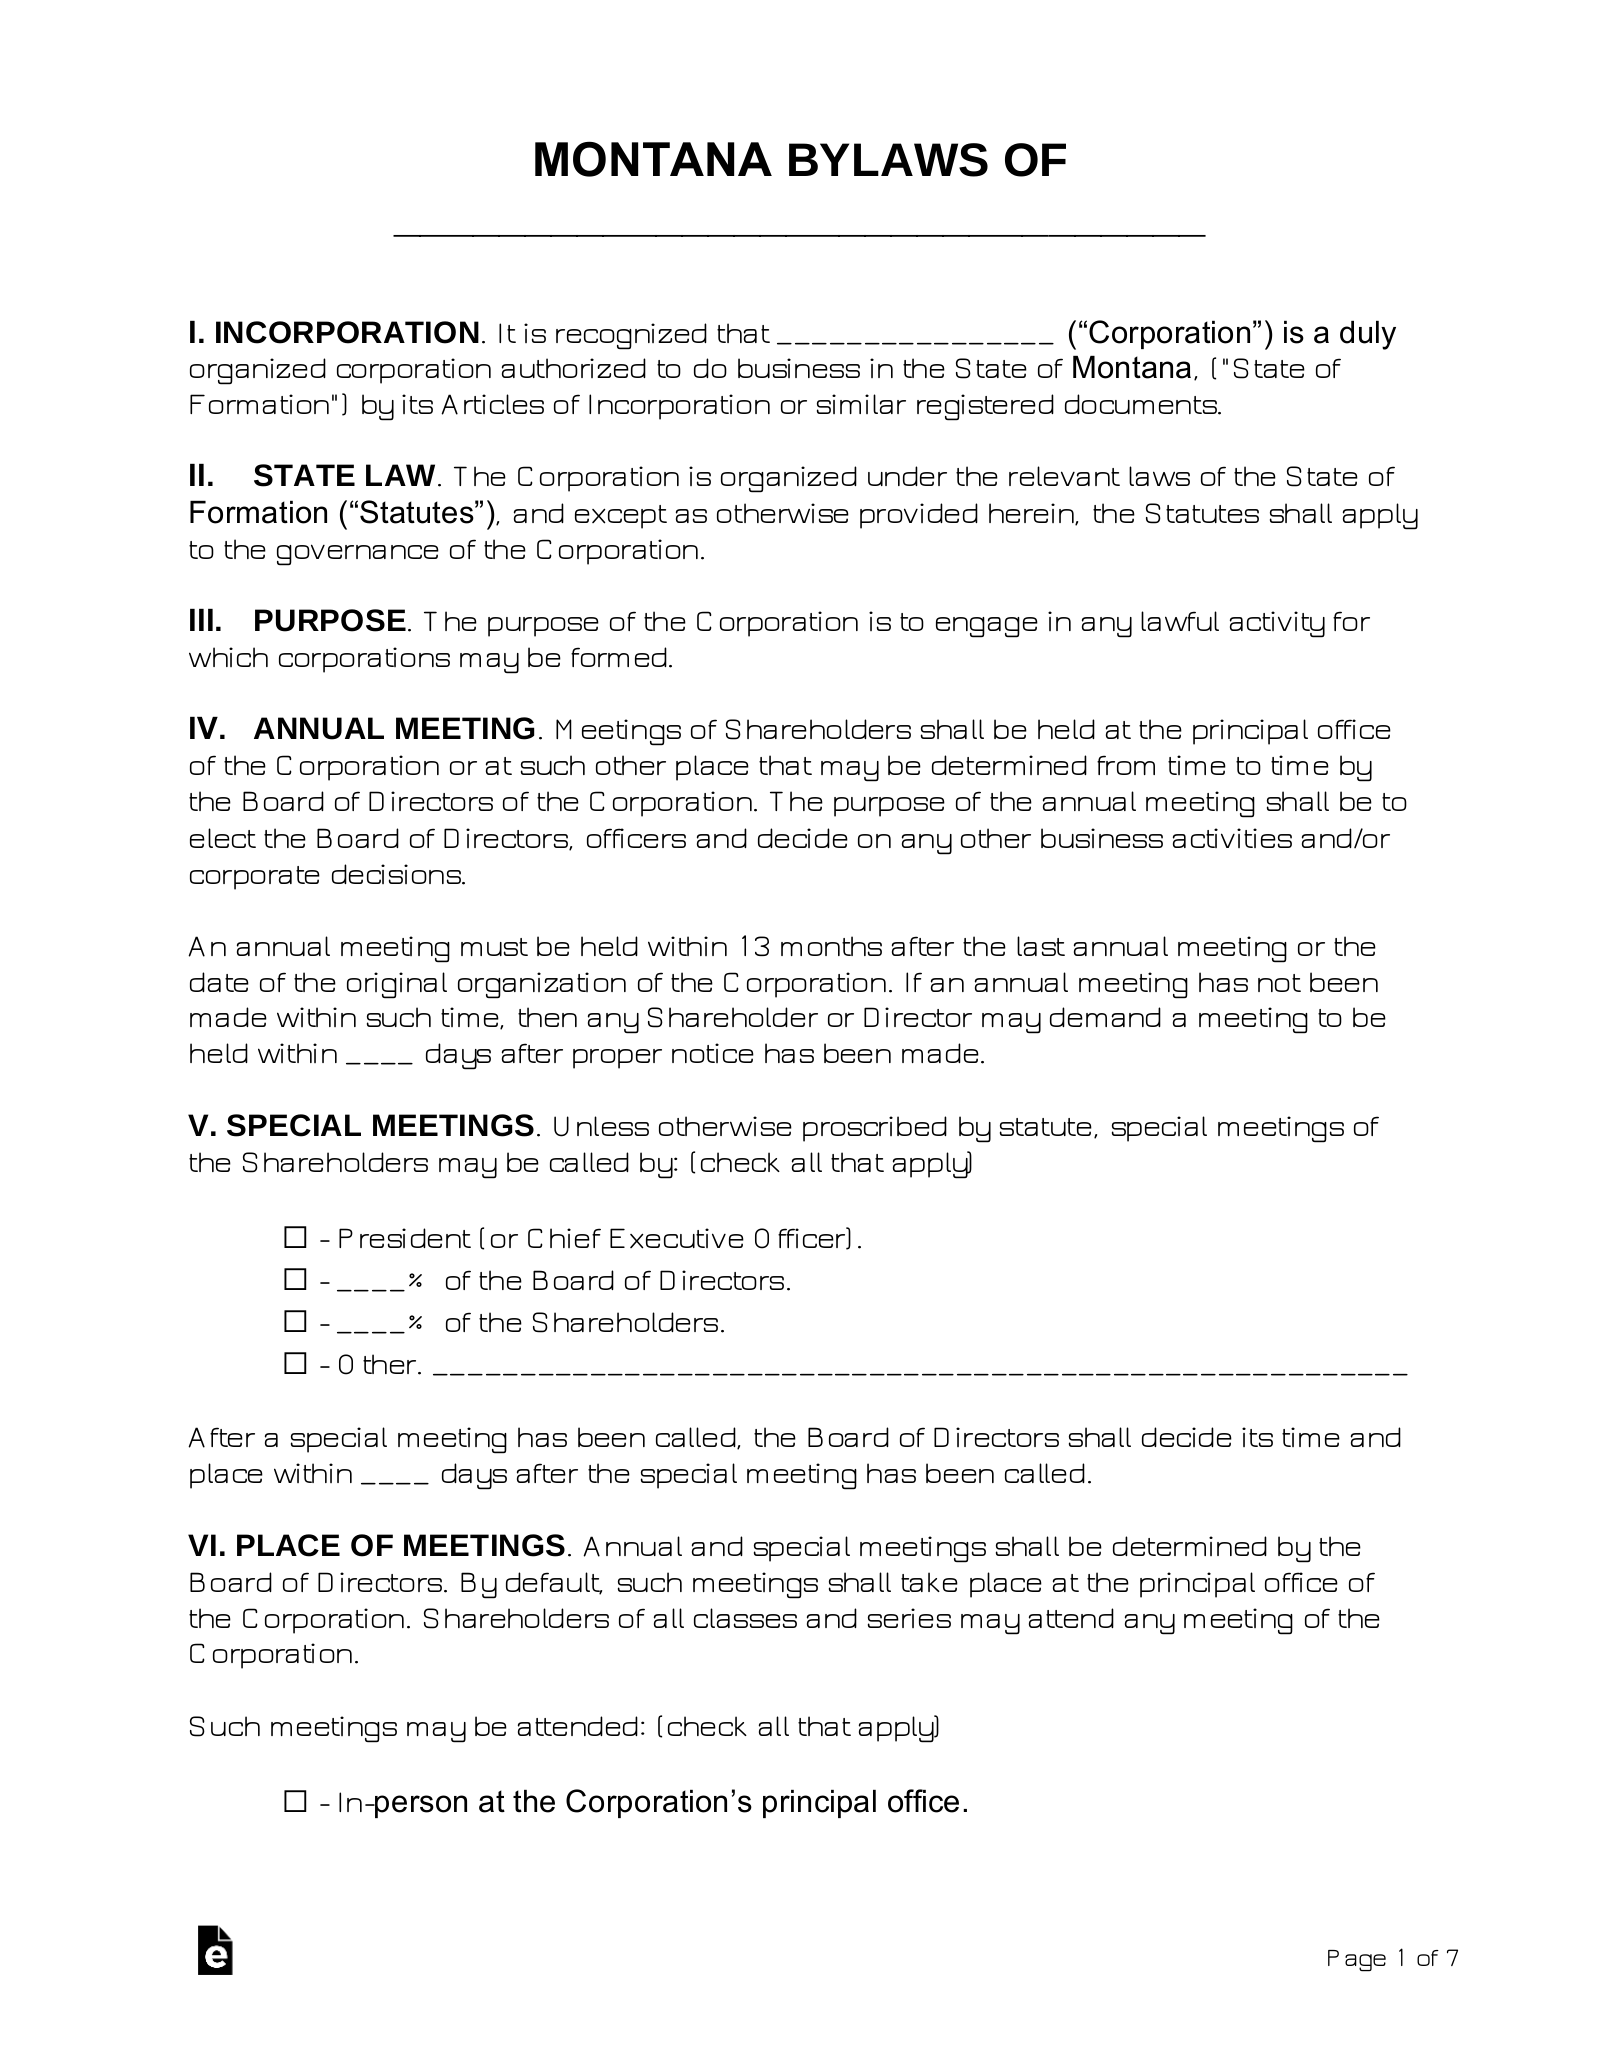 Montana Corporate Bylaws Template